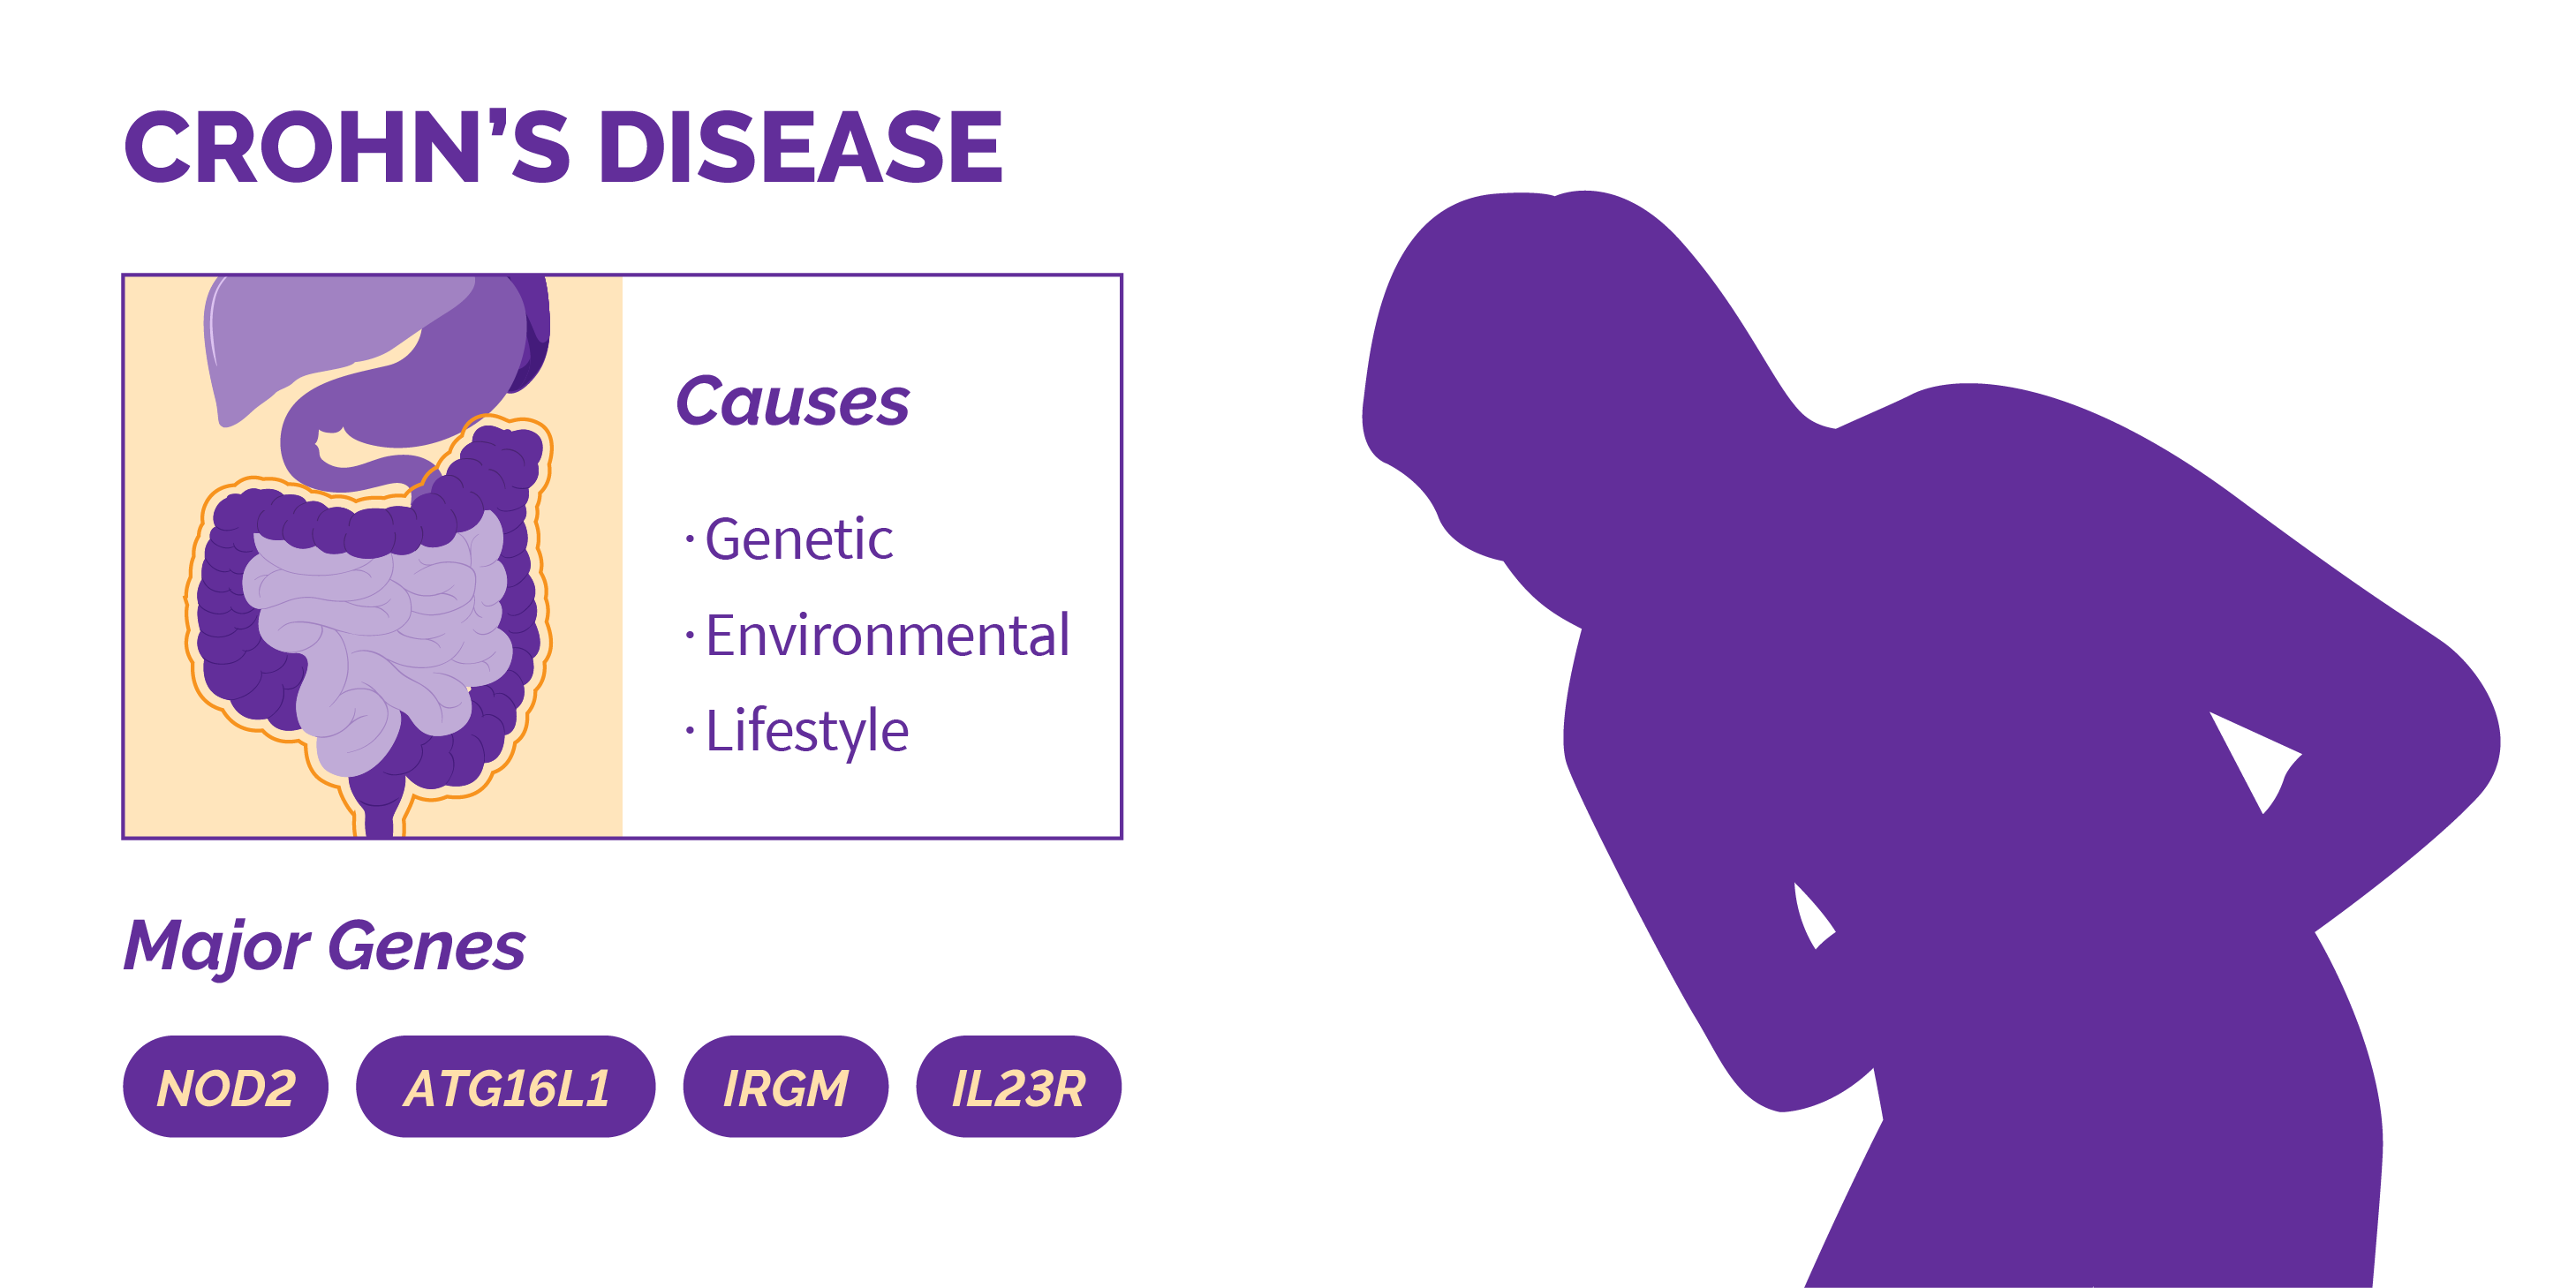 Crohn's disease is affected by genetic, environmental, and lifestyle factors. There are multiple genes related: NOD2, ATG16L1, IRGM, and IL23R